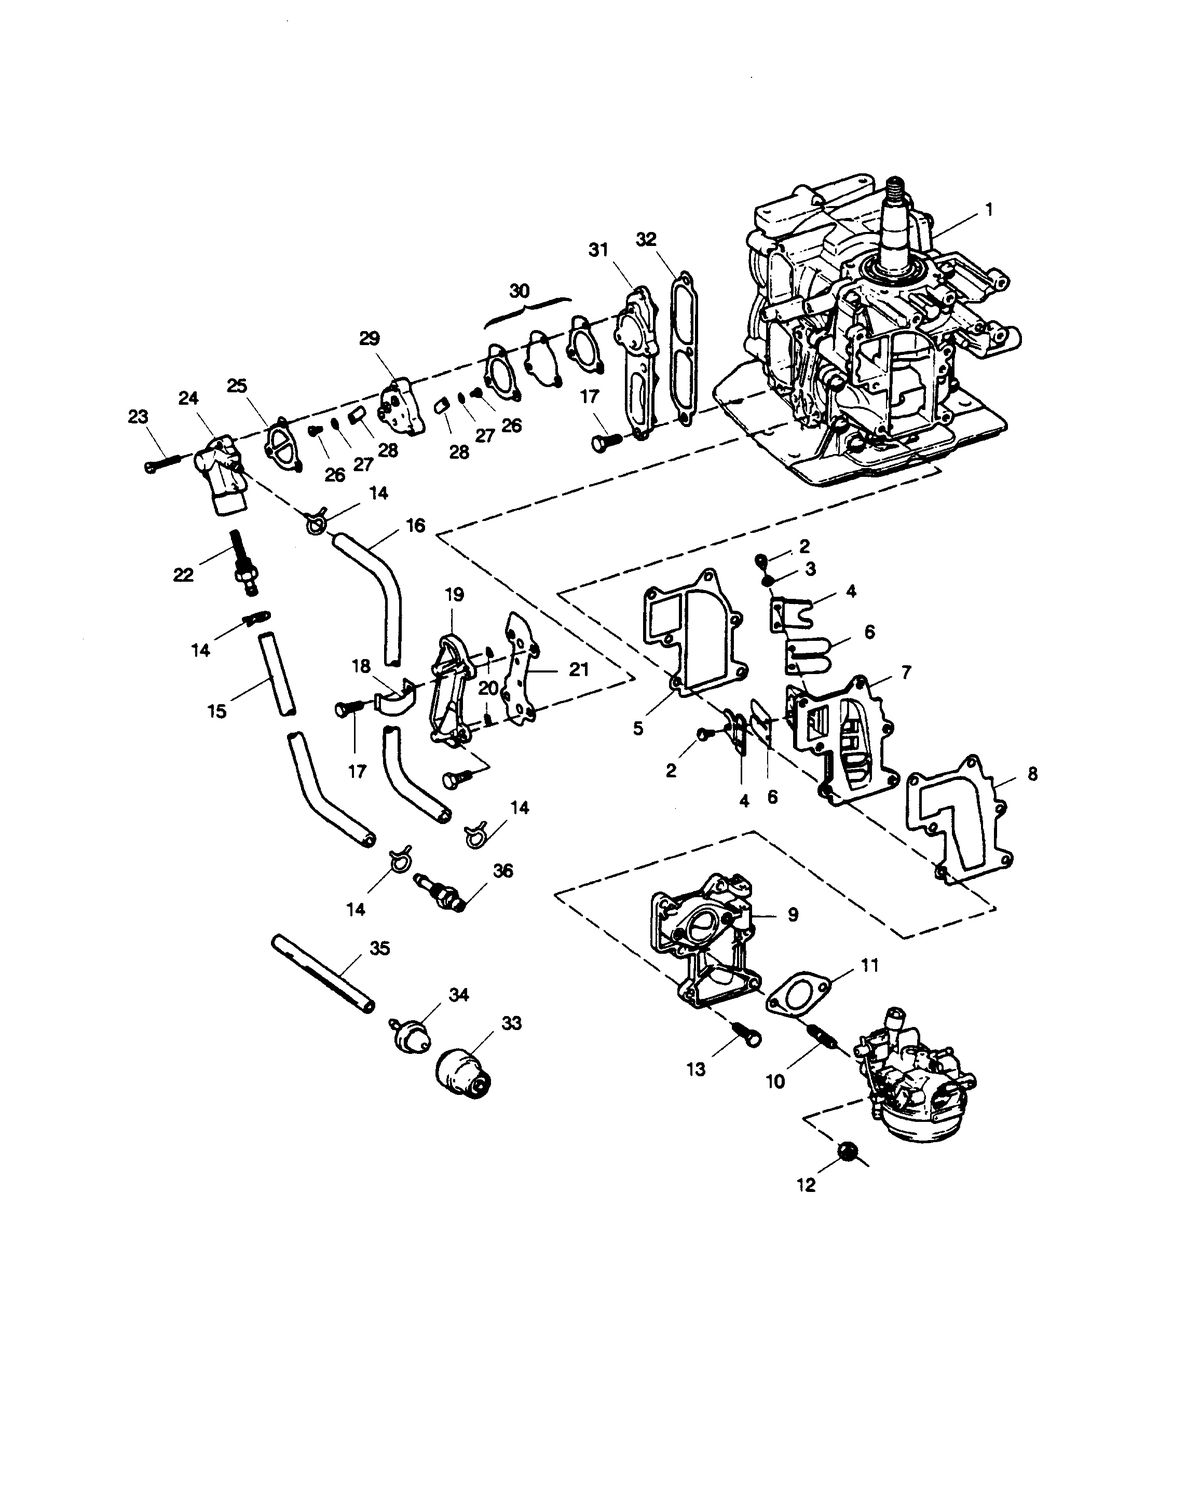 SEARS SEARS 15 H.P FUEL INTAKE AND RECIRCULATION SYSTEM